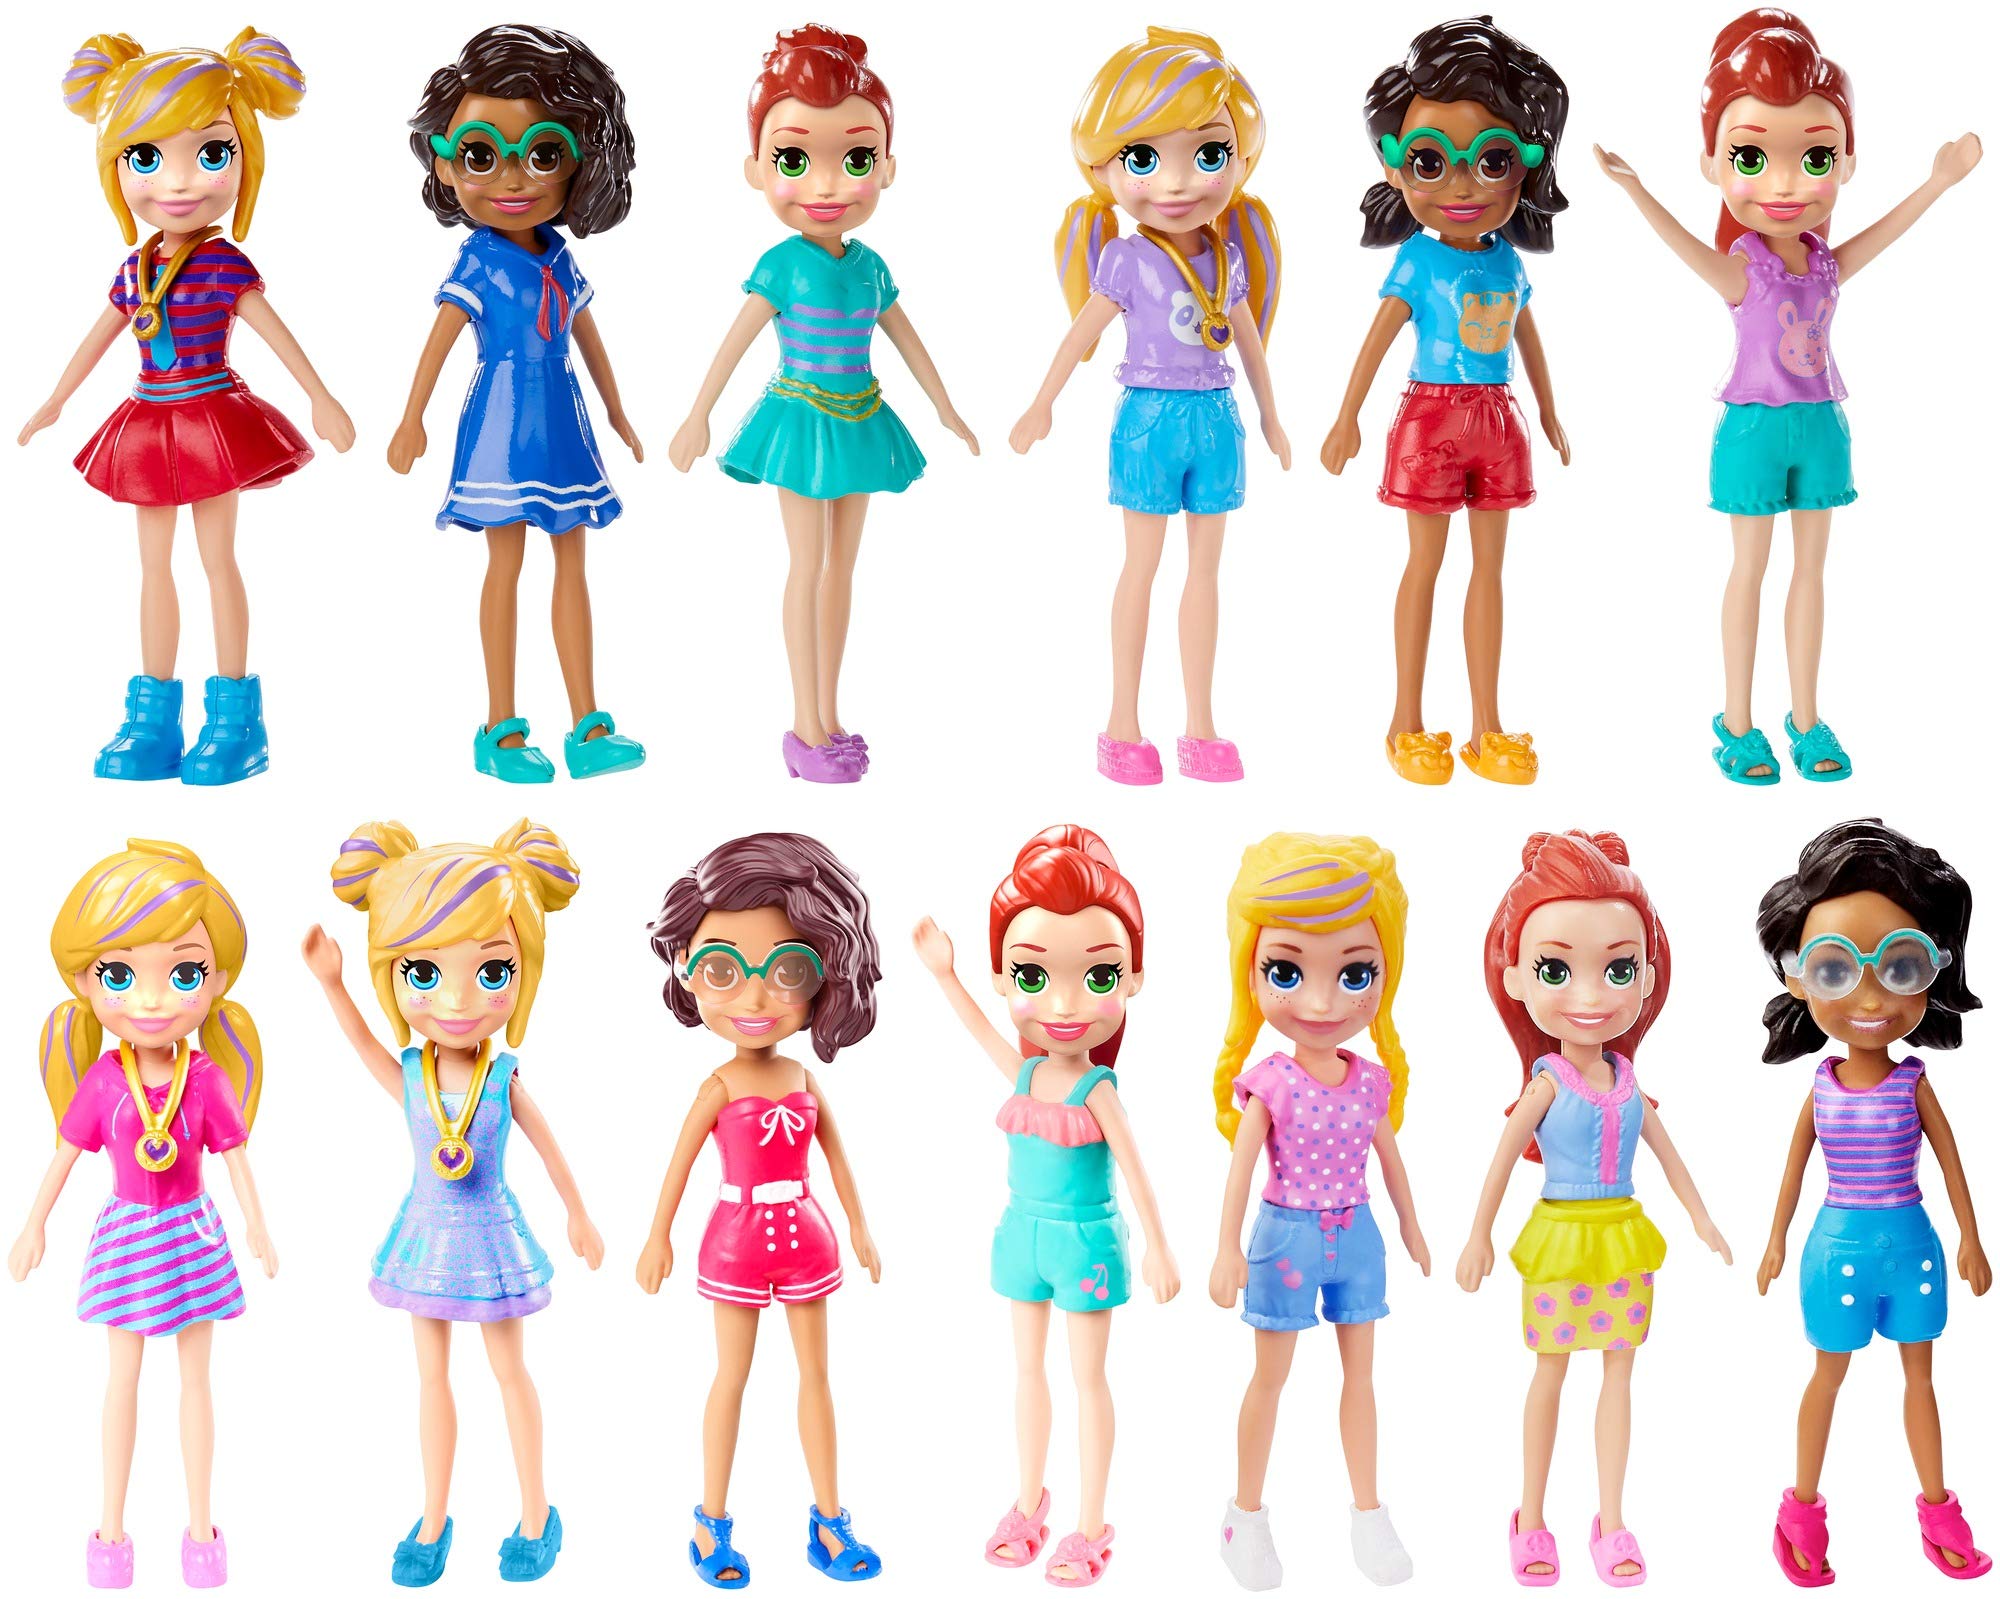 New Polly Pocket Live-Action Film Coming From Writer/Director Lena ...